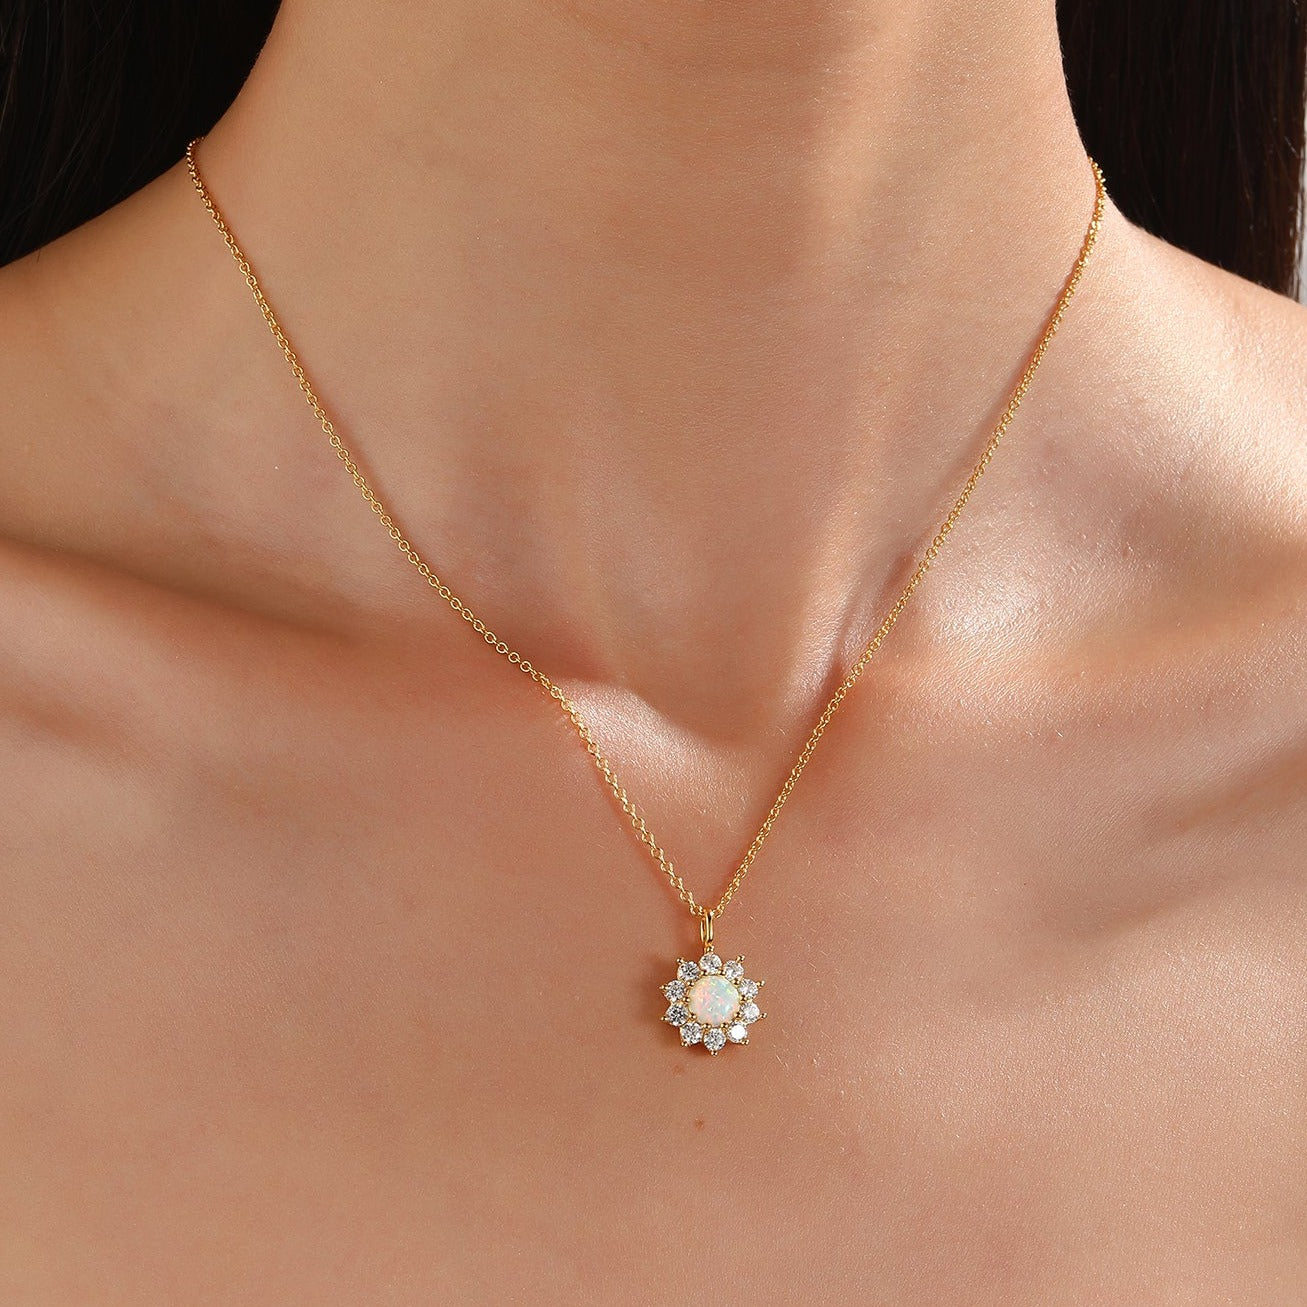 Sparkling White Opal Sunflower Necklace